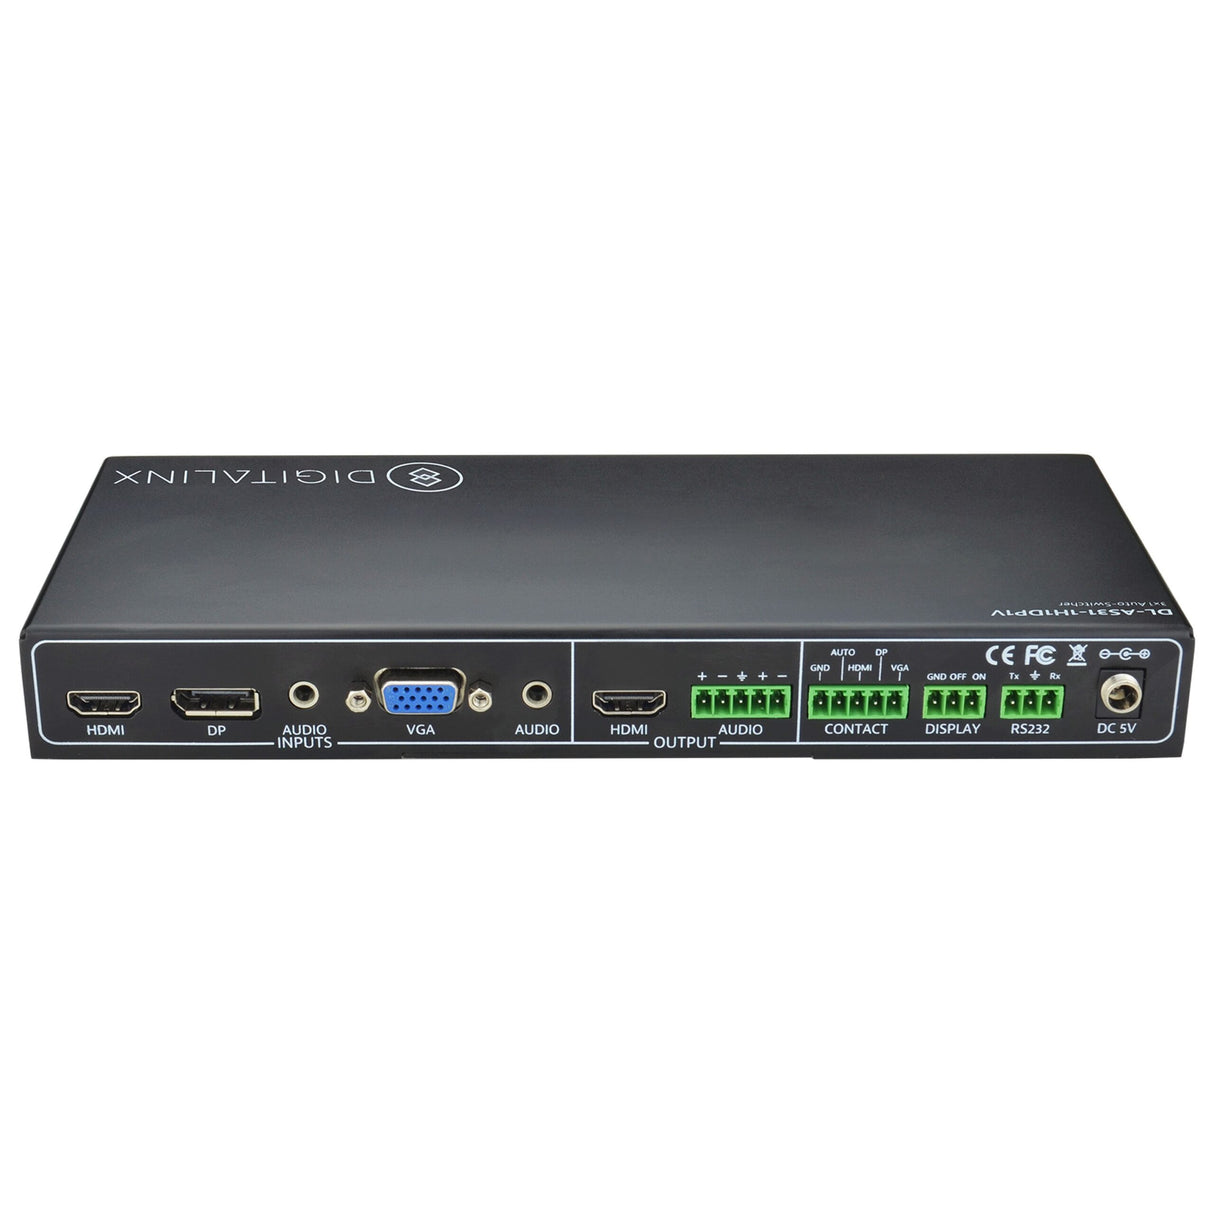 DigitaLinx DL-AS31-1H1DP1V 3 x 1 Auto Switcher with HDMI, Display Port and VGA Inputs